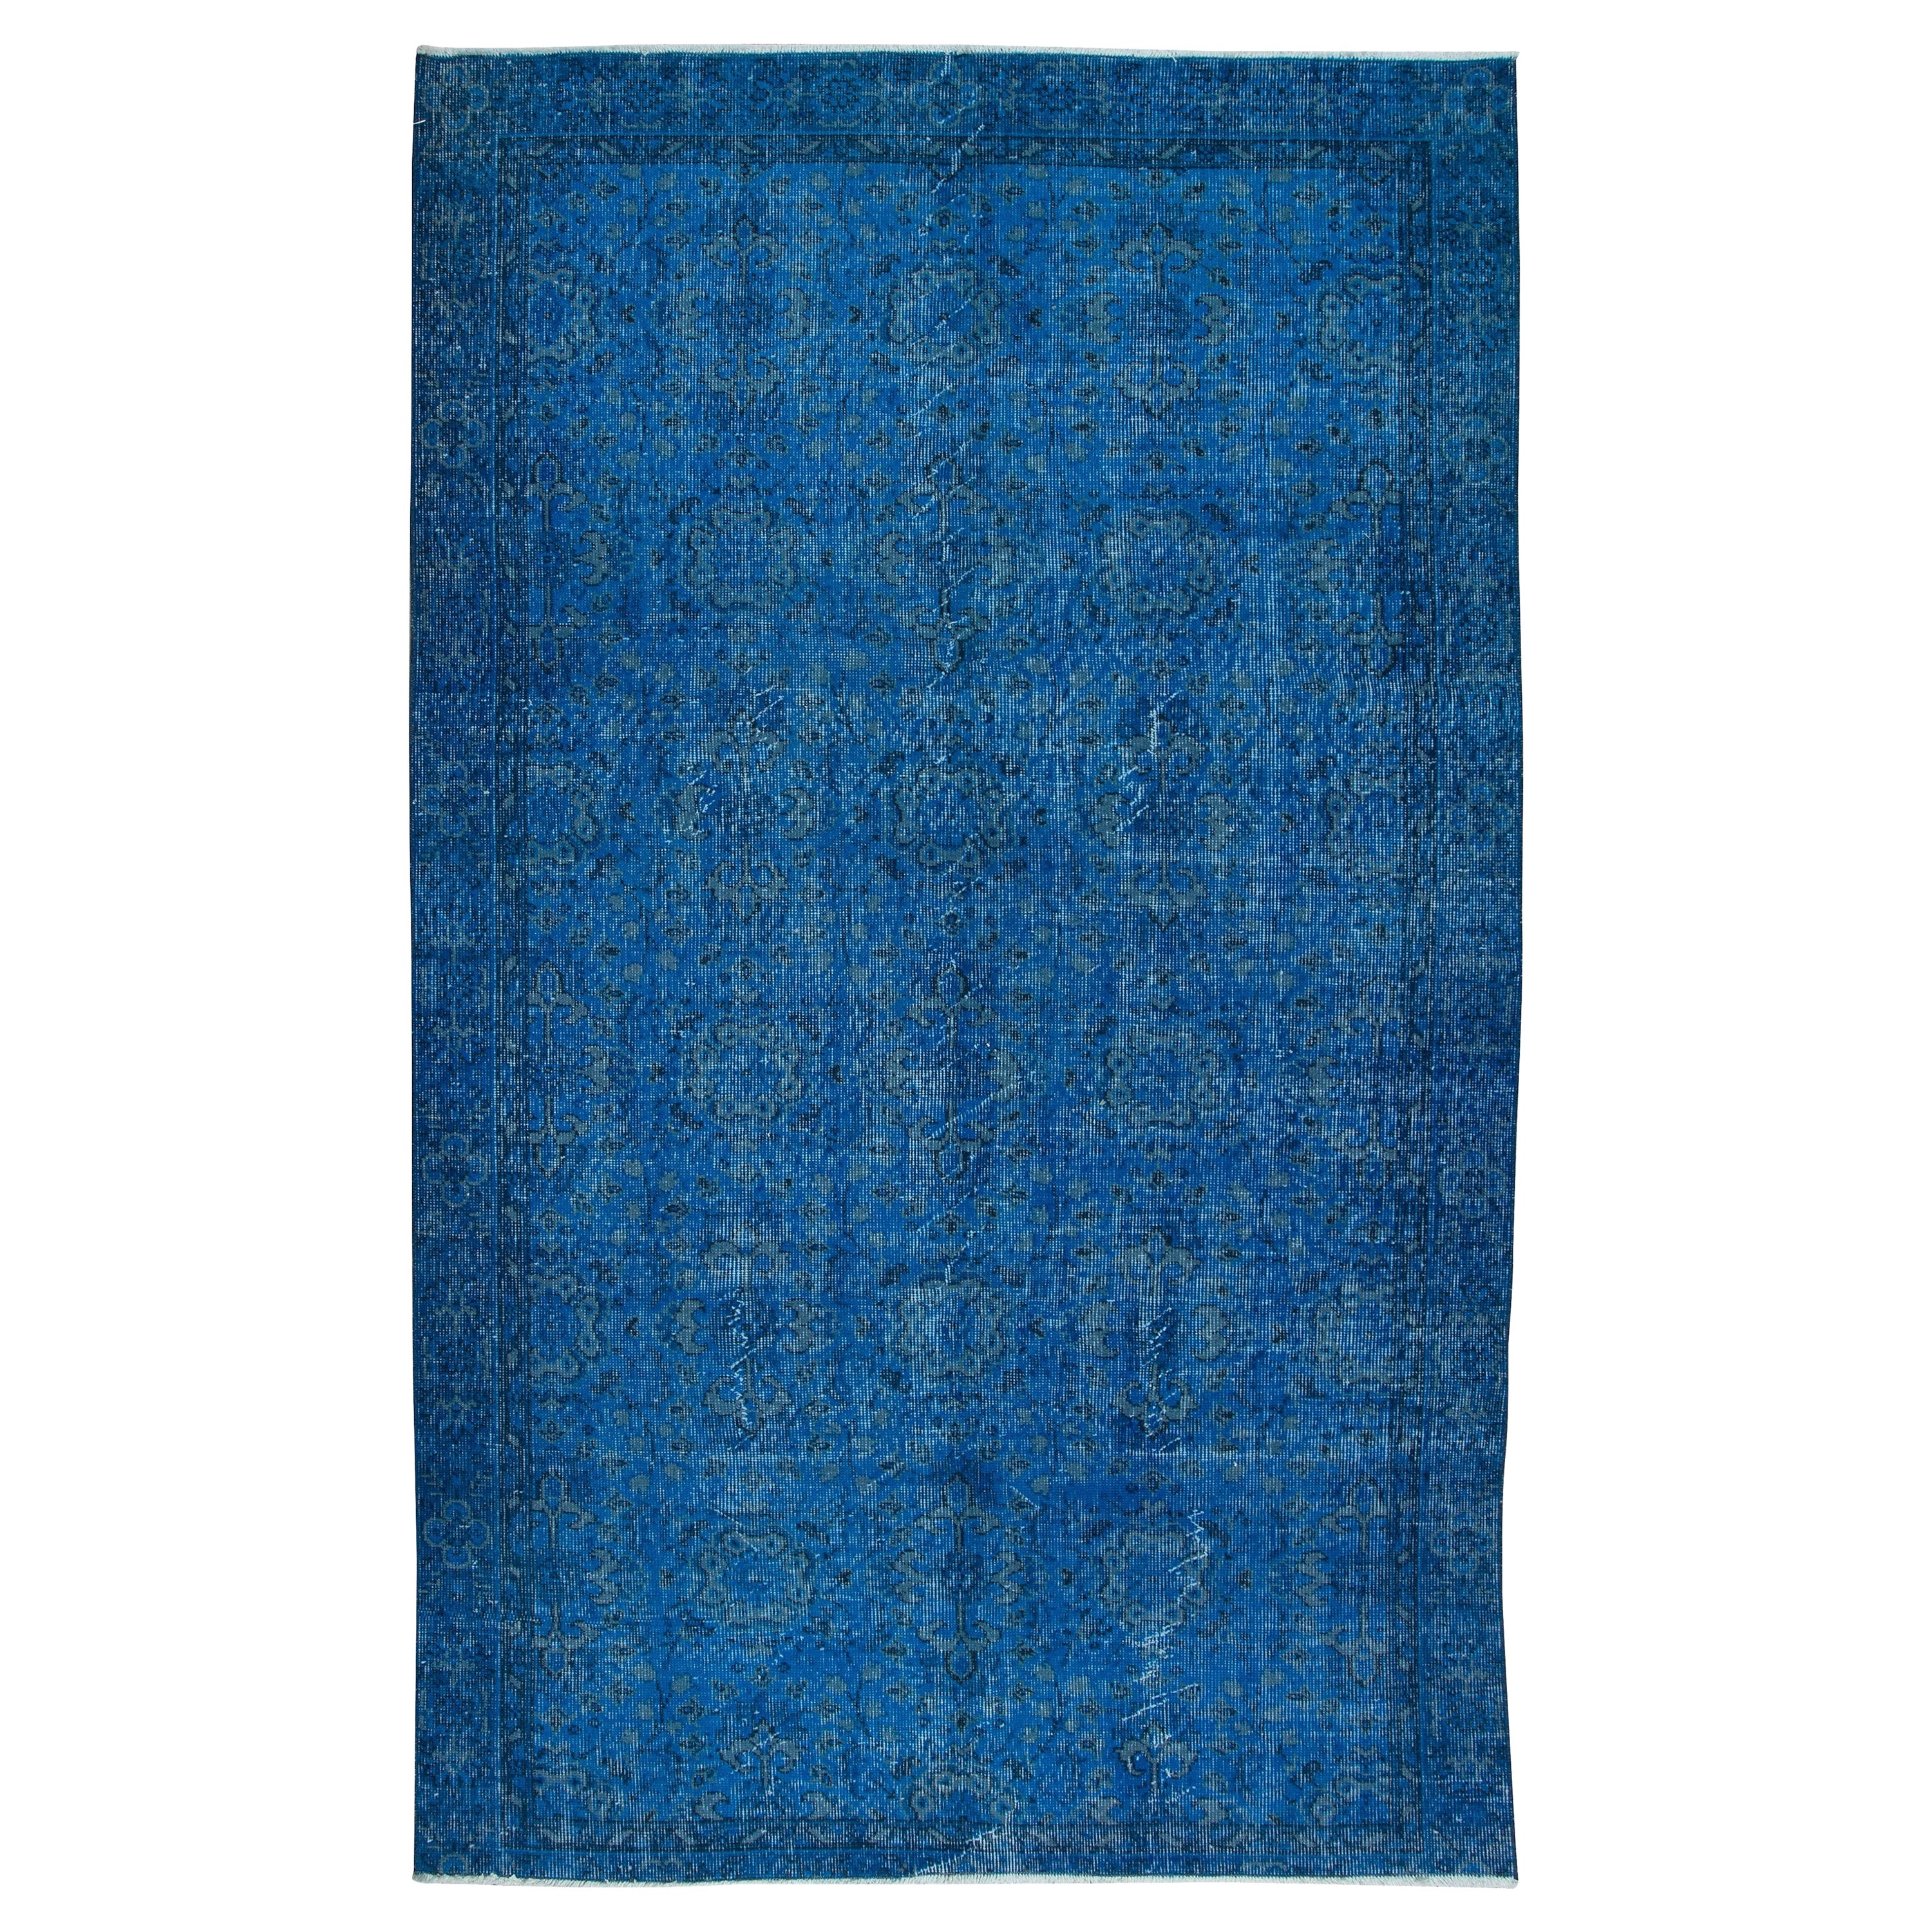 5x8.2 Ft Handmade Area Rug with in Blue Tones, Contemporary Turkish Carpet For Sale